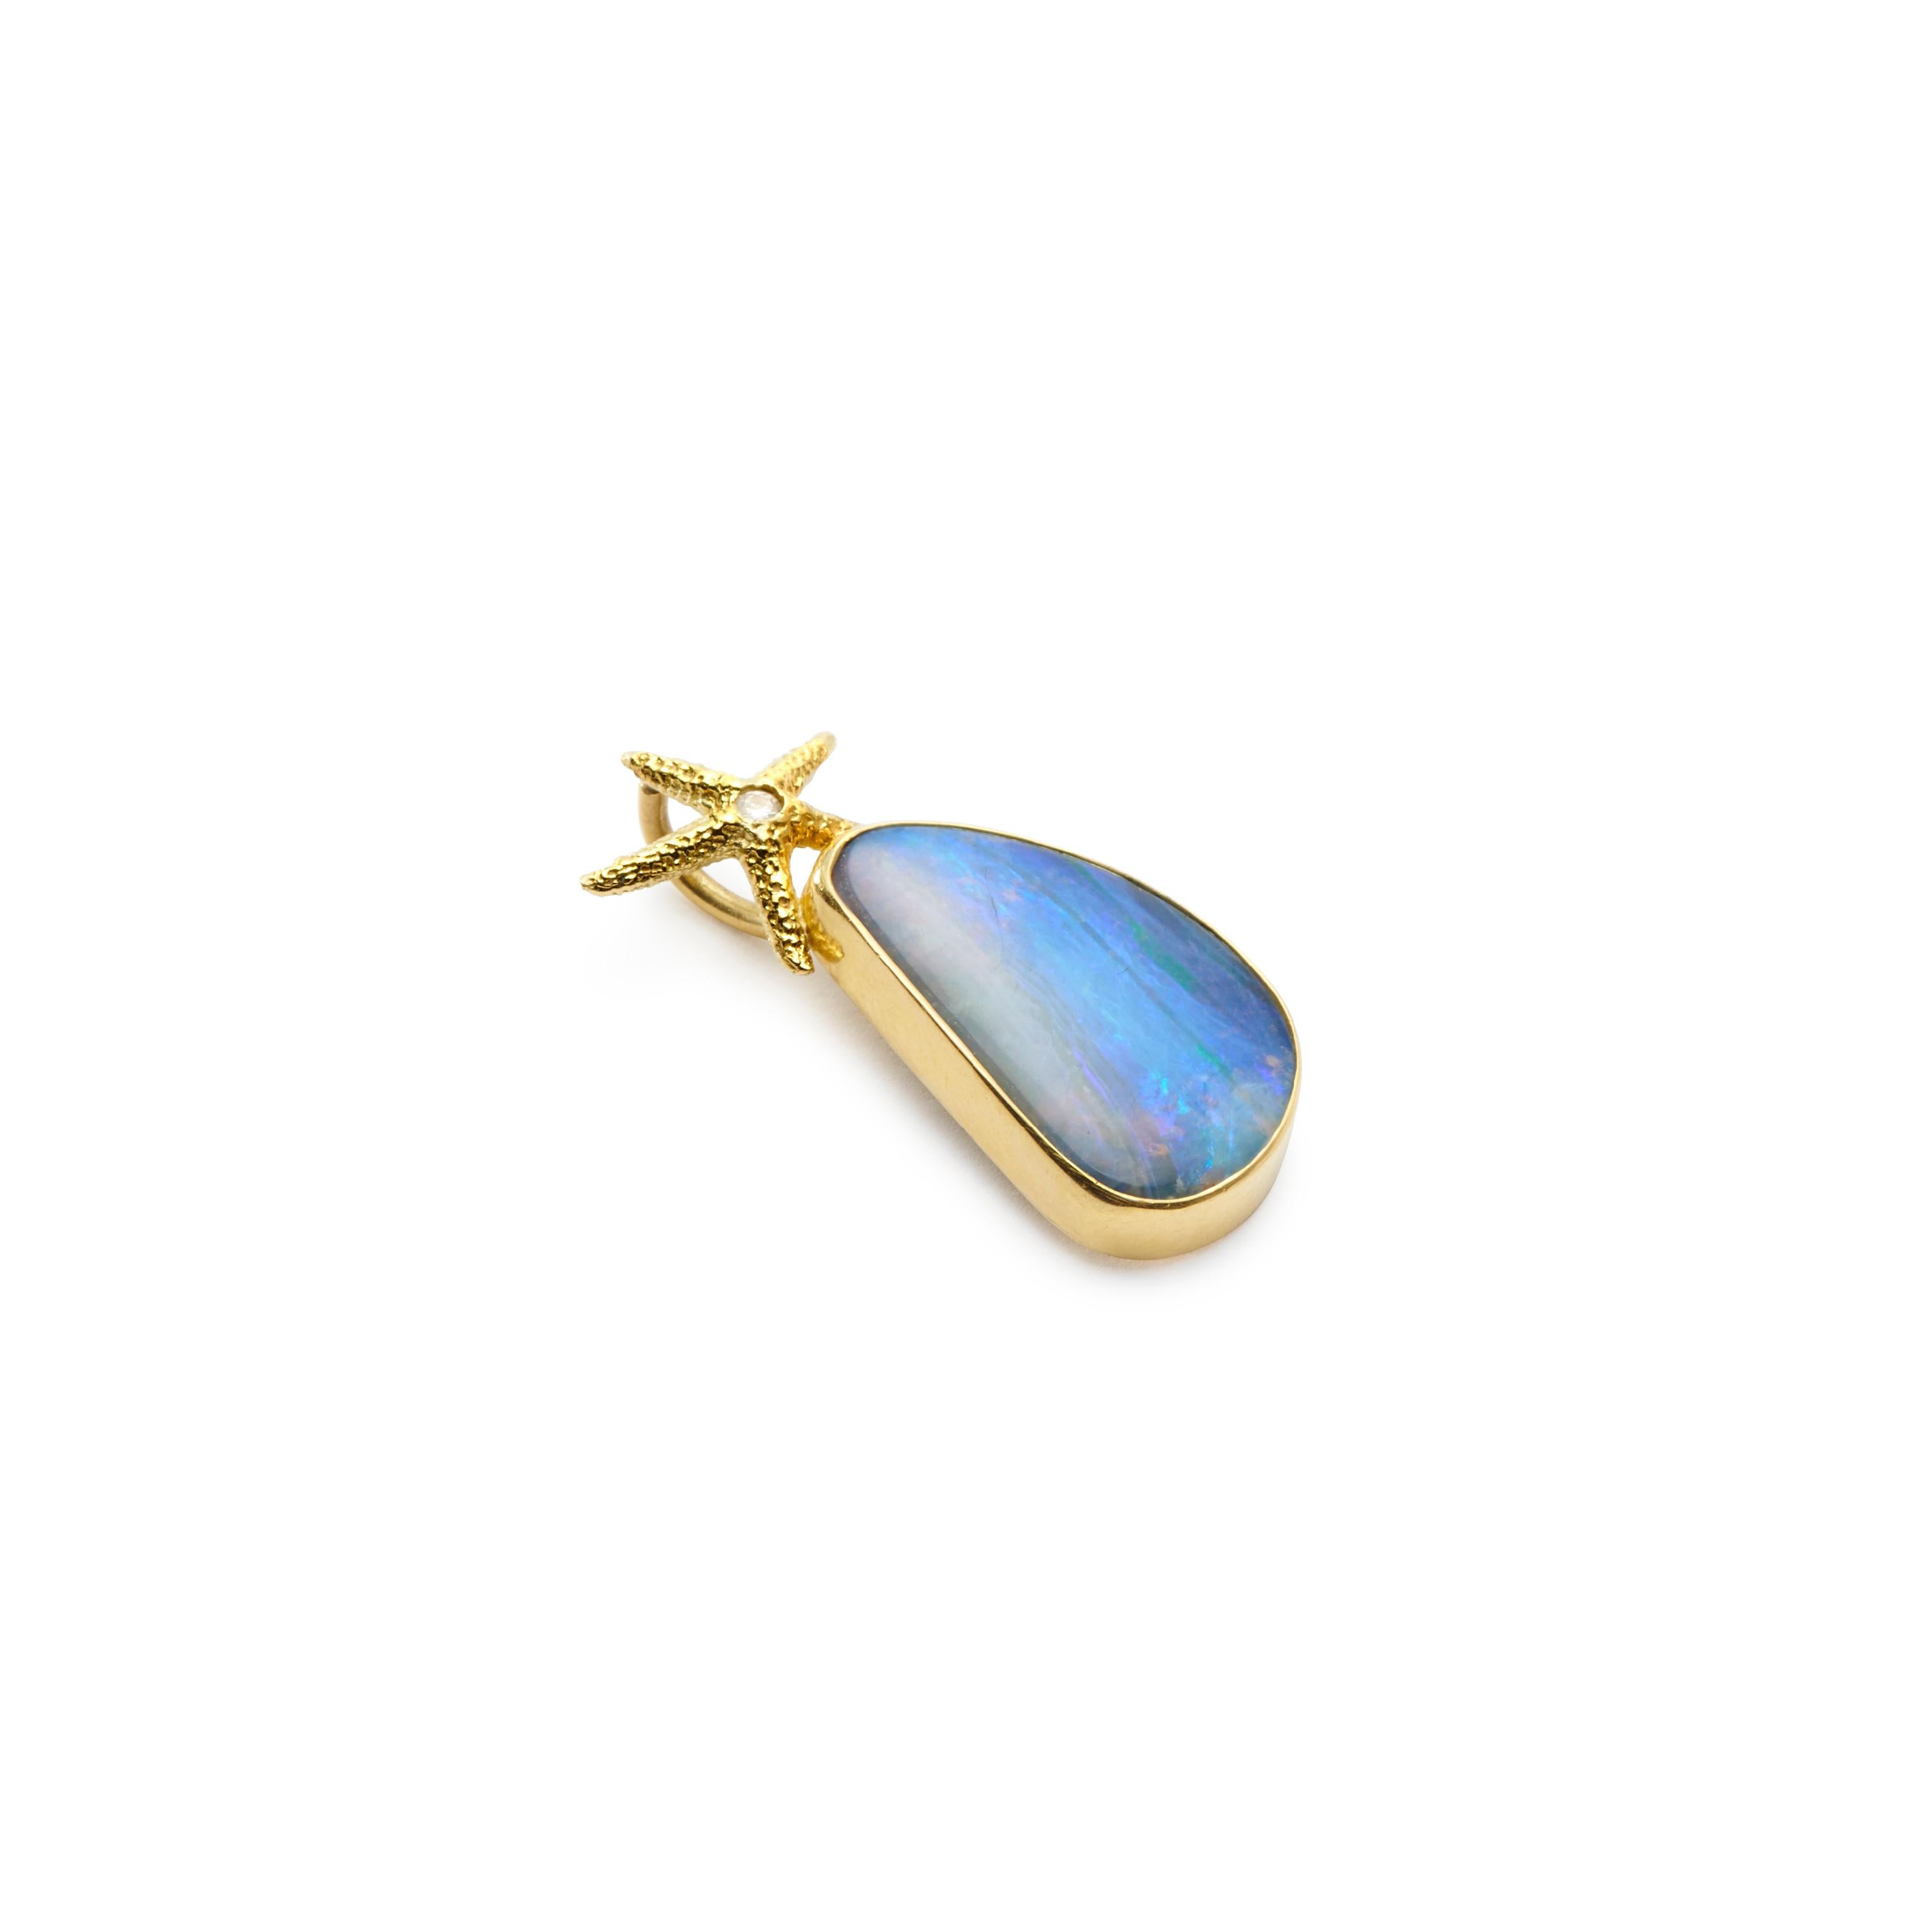 Gorgeous shades of blue in this lovely little Boulder Opal Pendant suspended from a sparkling starfish bale set with a diamond. Wear it alone or layer it, wear it with a white t-shirt or your favorite summer dress.
  
